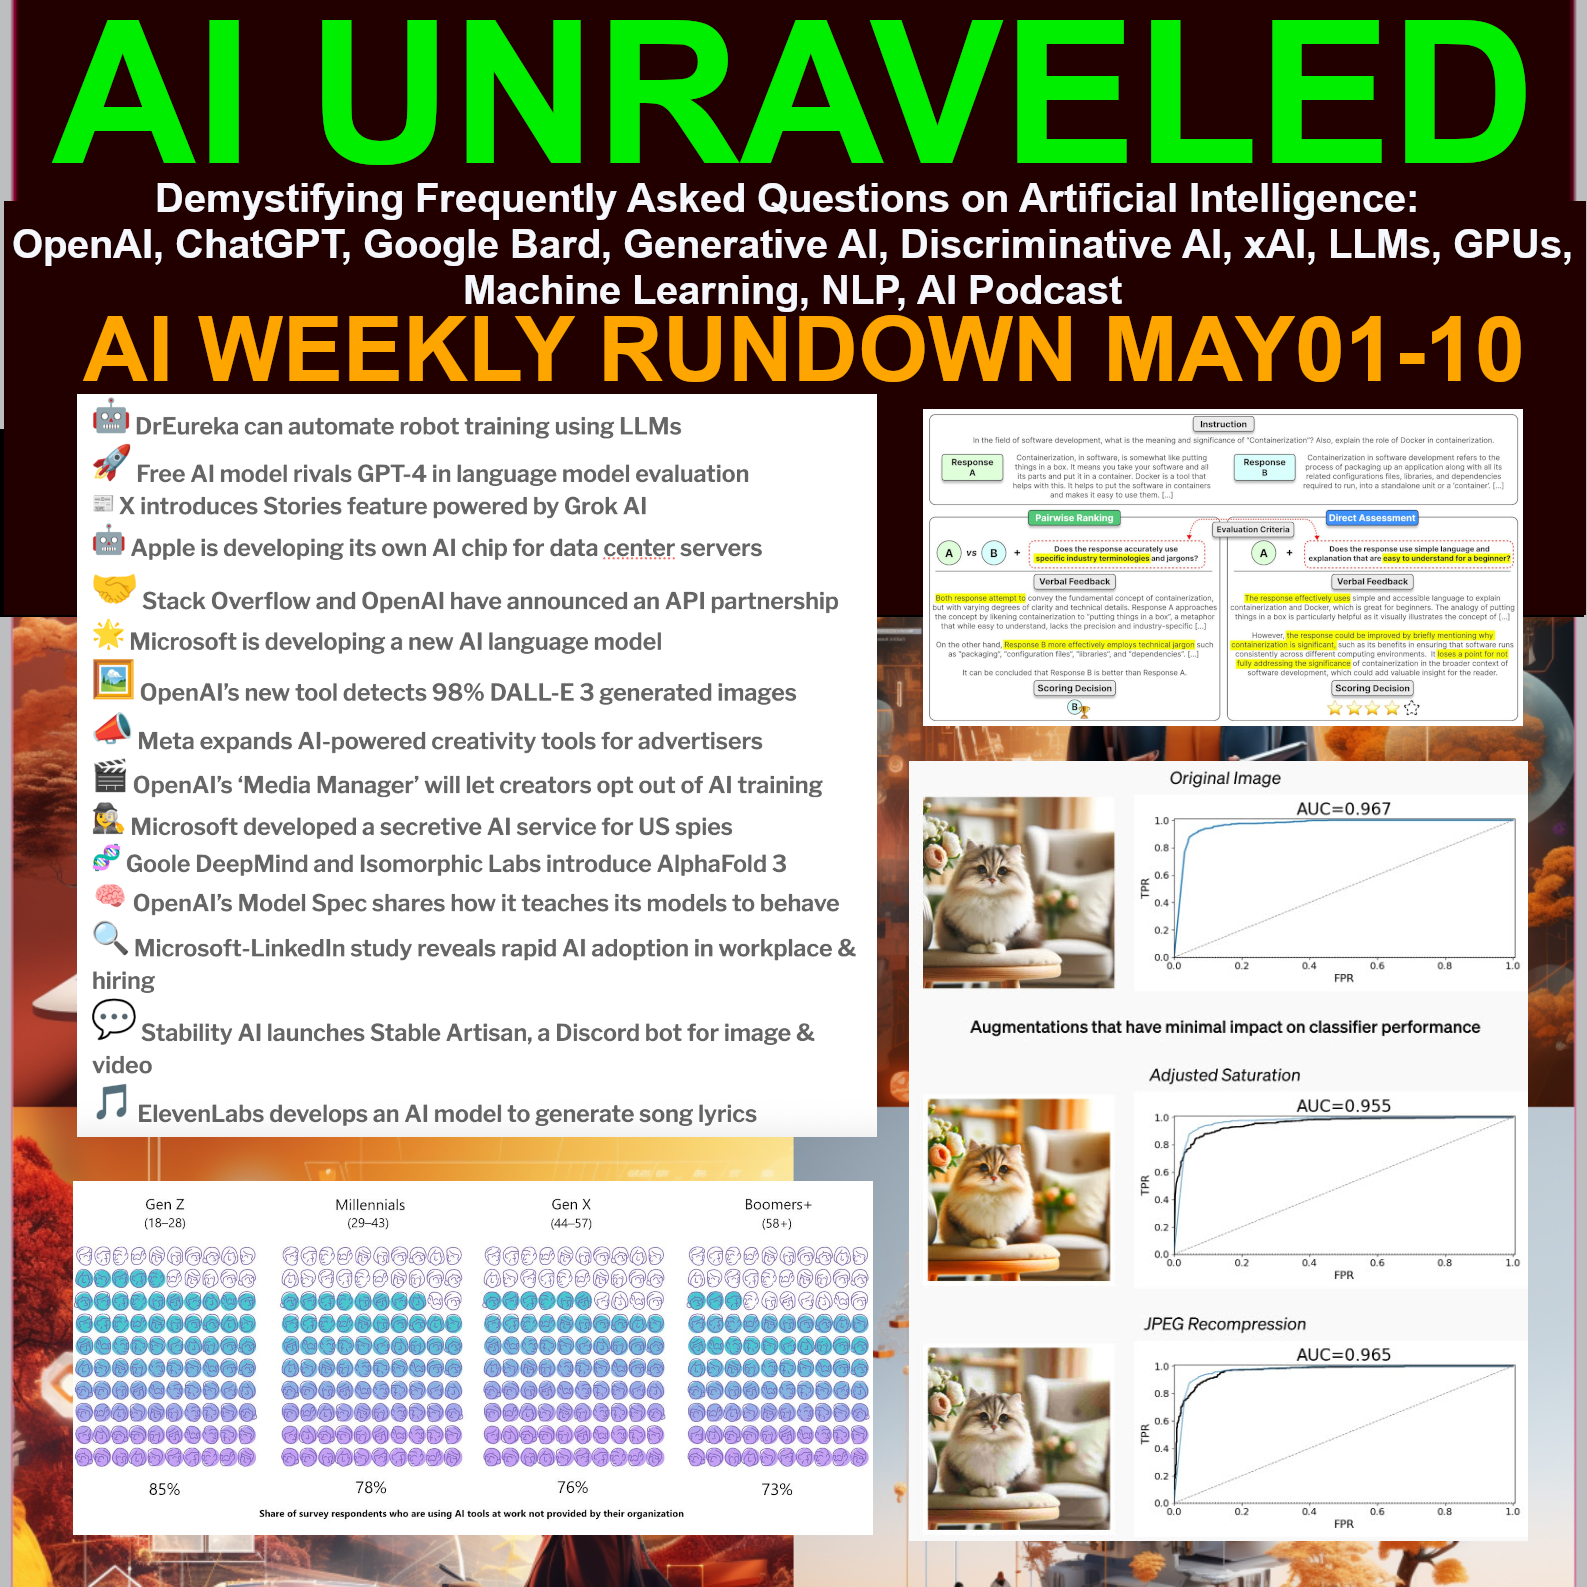 AI Weekly Rundown May 01-May 10th 2024: Major Breaking News: DrEureka can automate robot training using LLMs, X introduces Stories feature powered by Grok AI, Apple developing own AI chip, AlphaFold 3